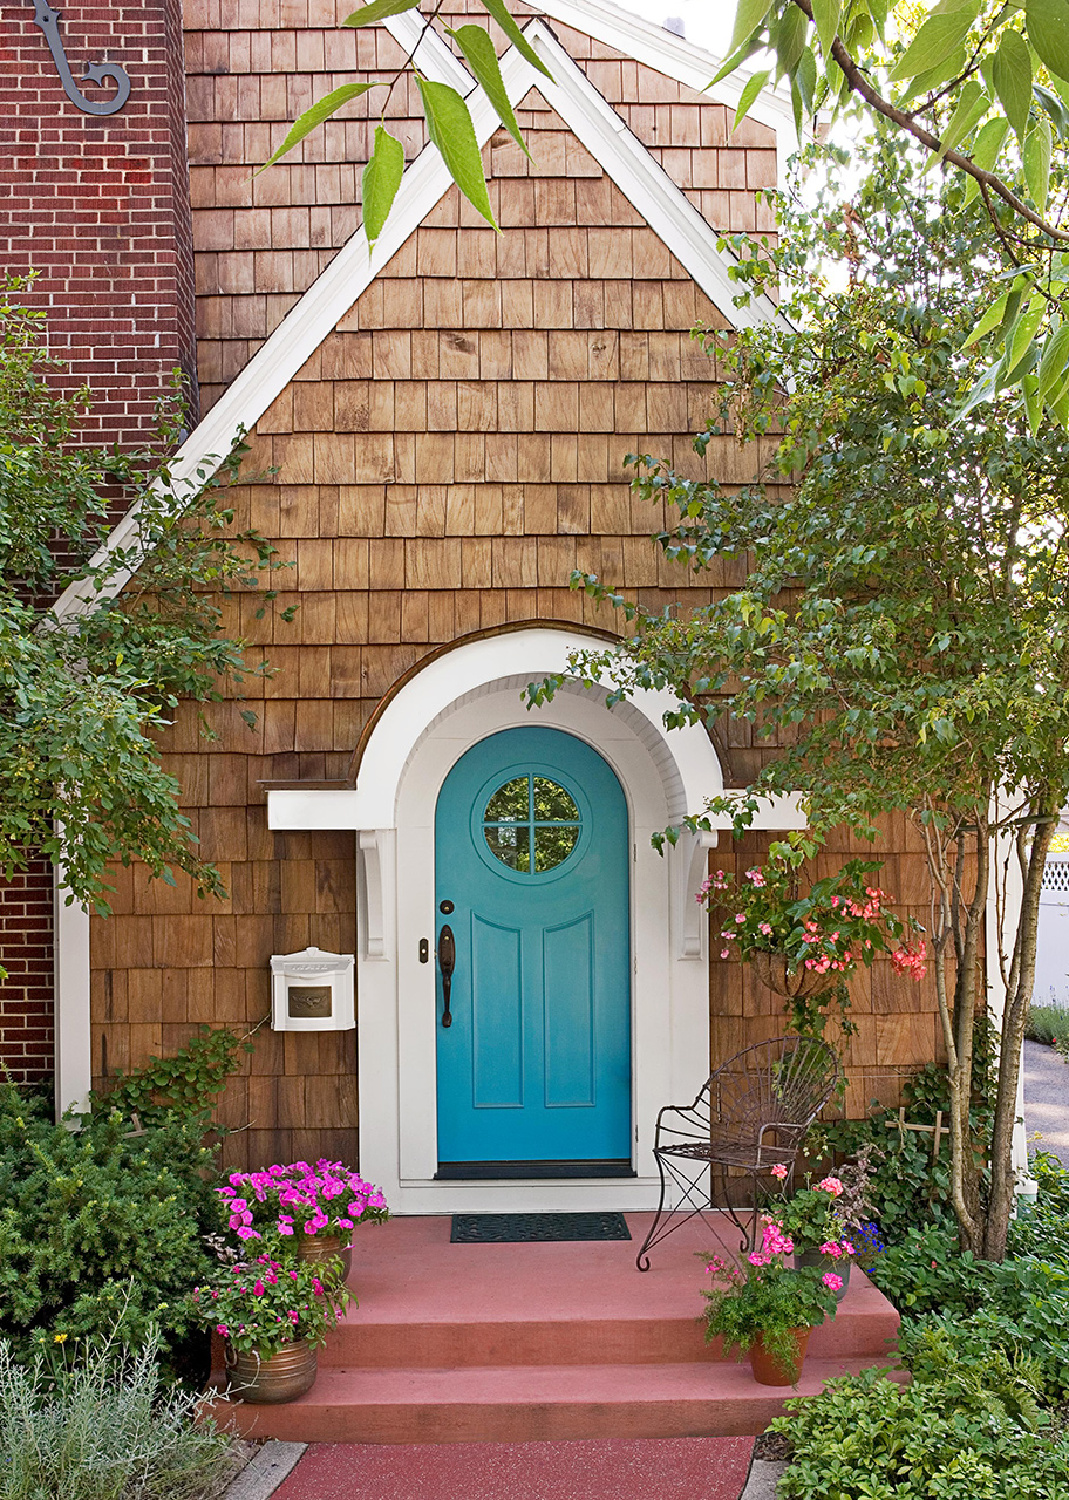 Turquoise front door with arch and round window on a cedar shake cottage - BHG (photo: Janet Mesic-Mackie). #turquoise #frontdoors #tudorcottage